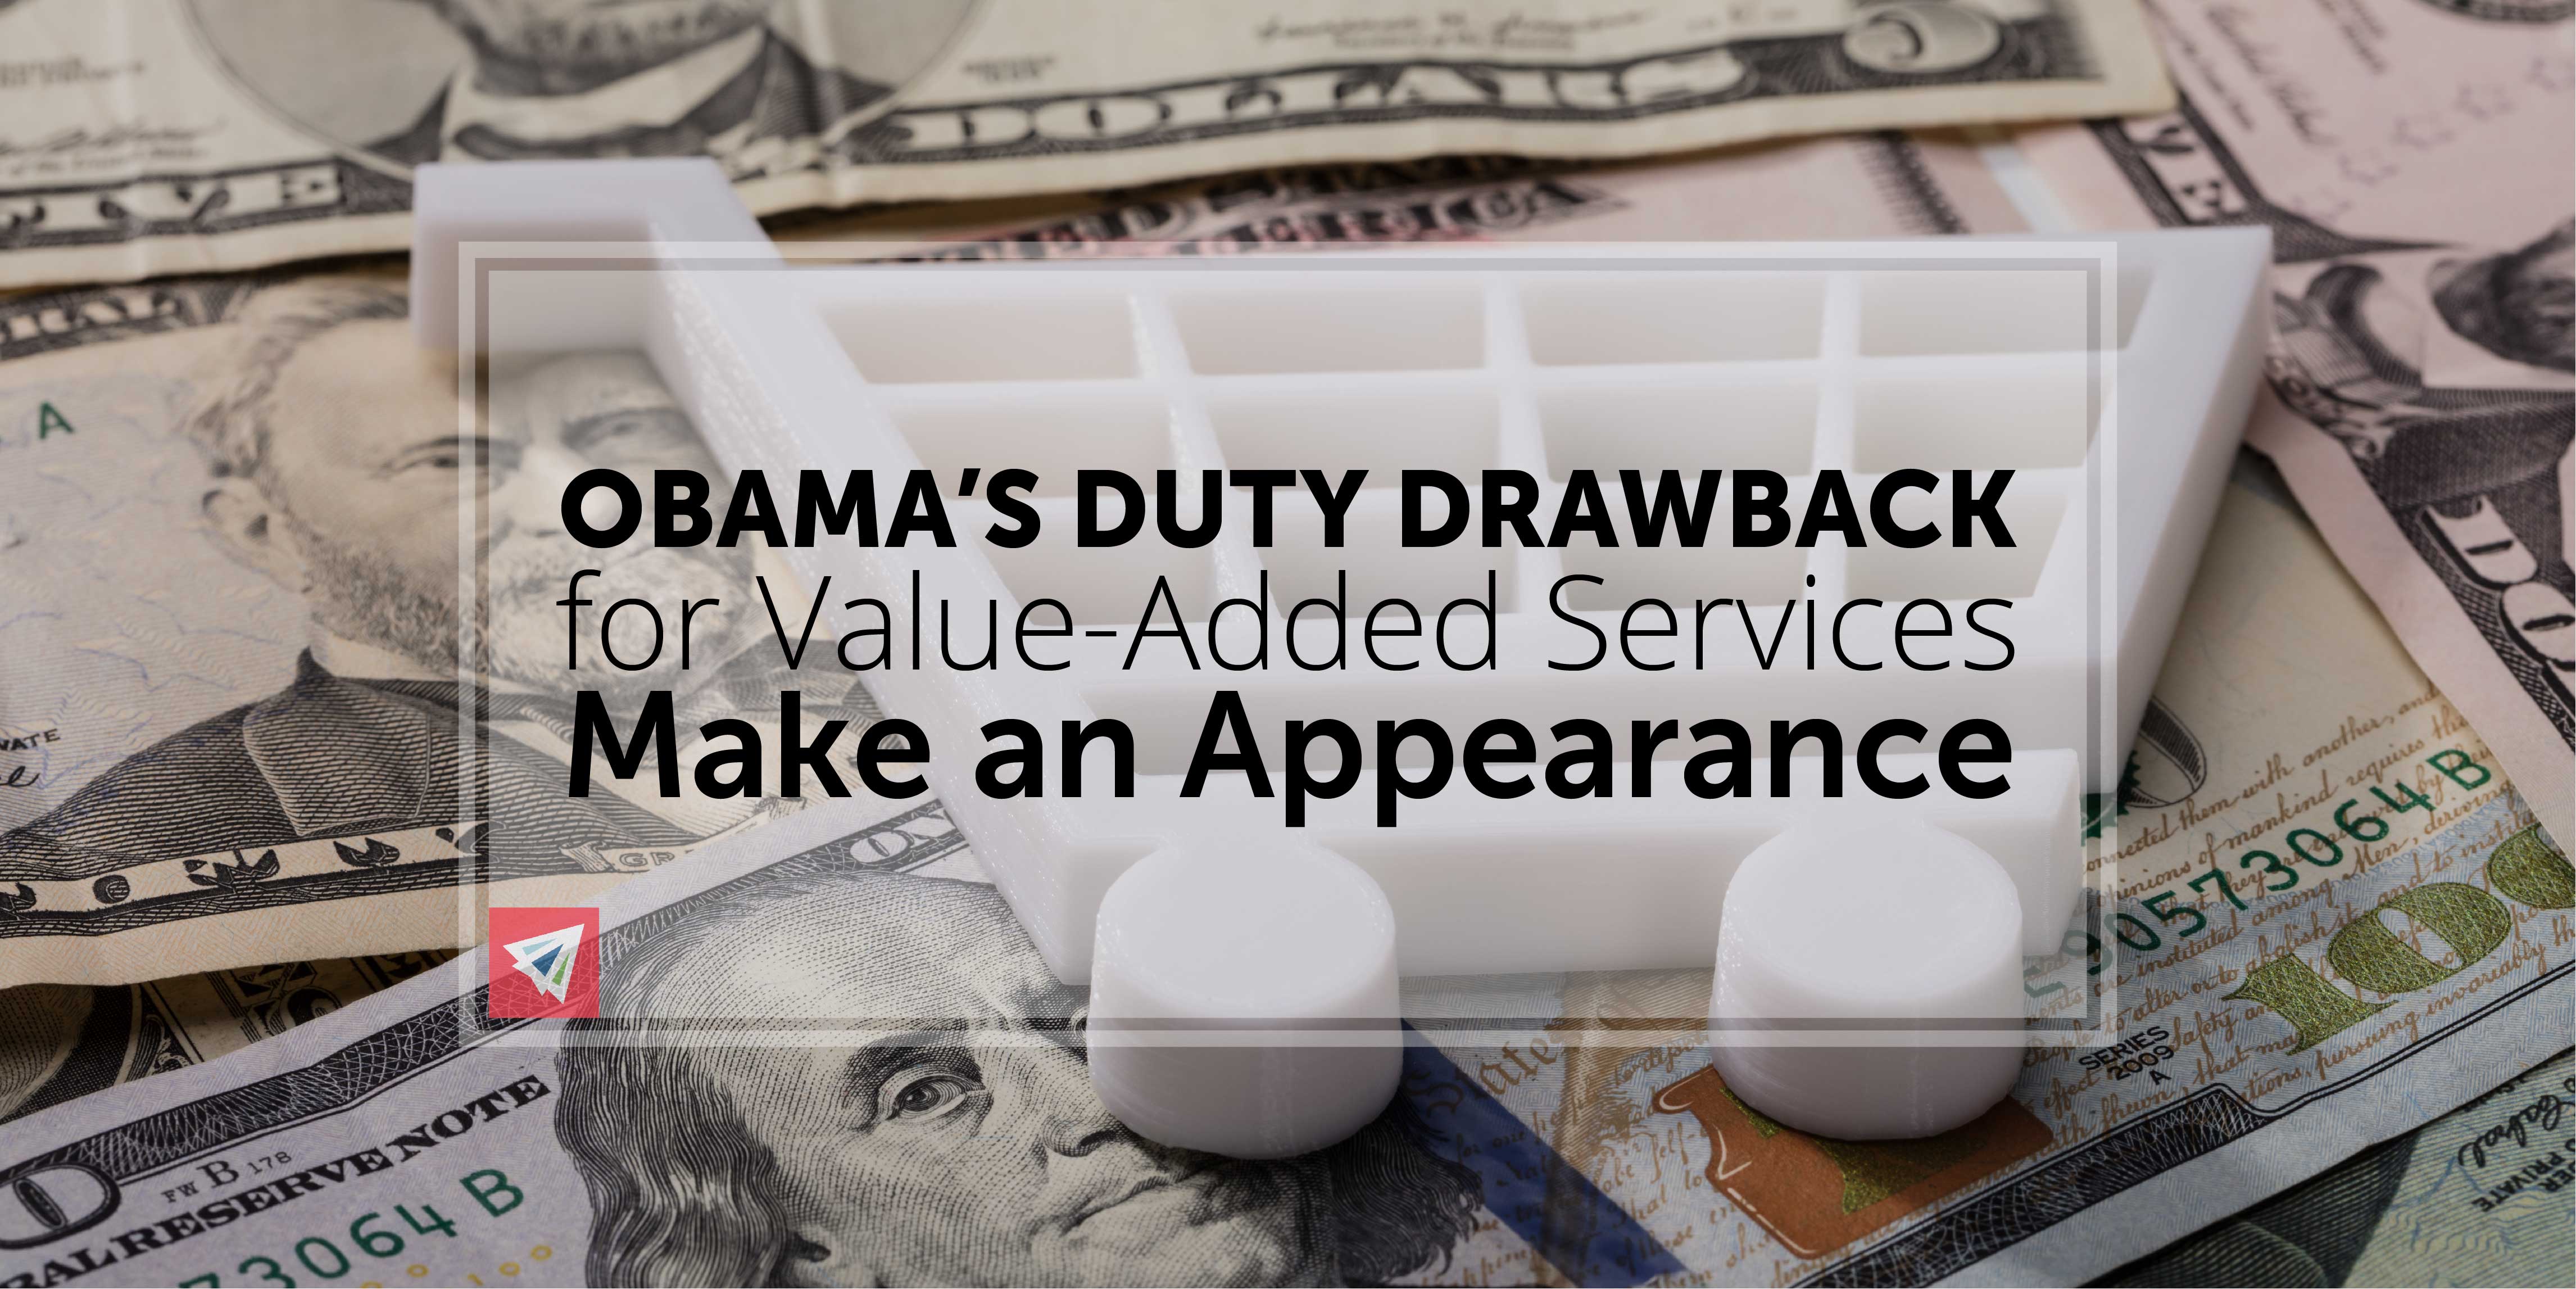 Obama’s Duty Drawback for Value-Added Services Make an Appearance